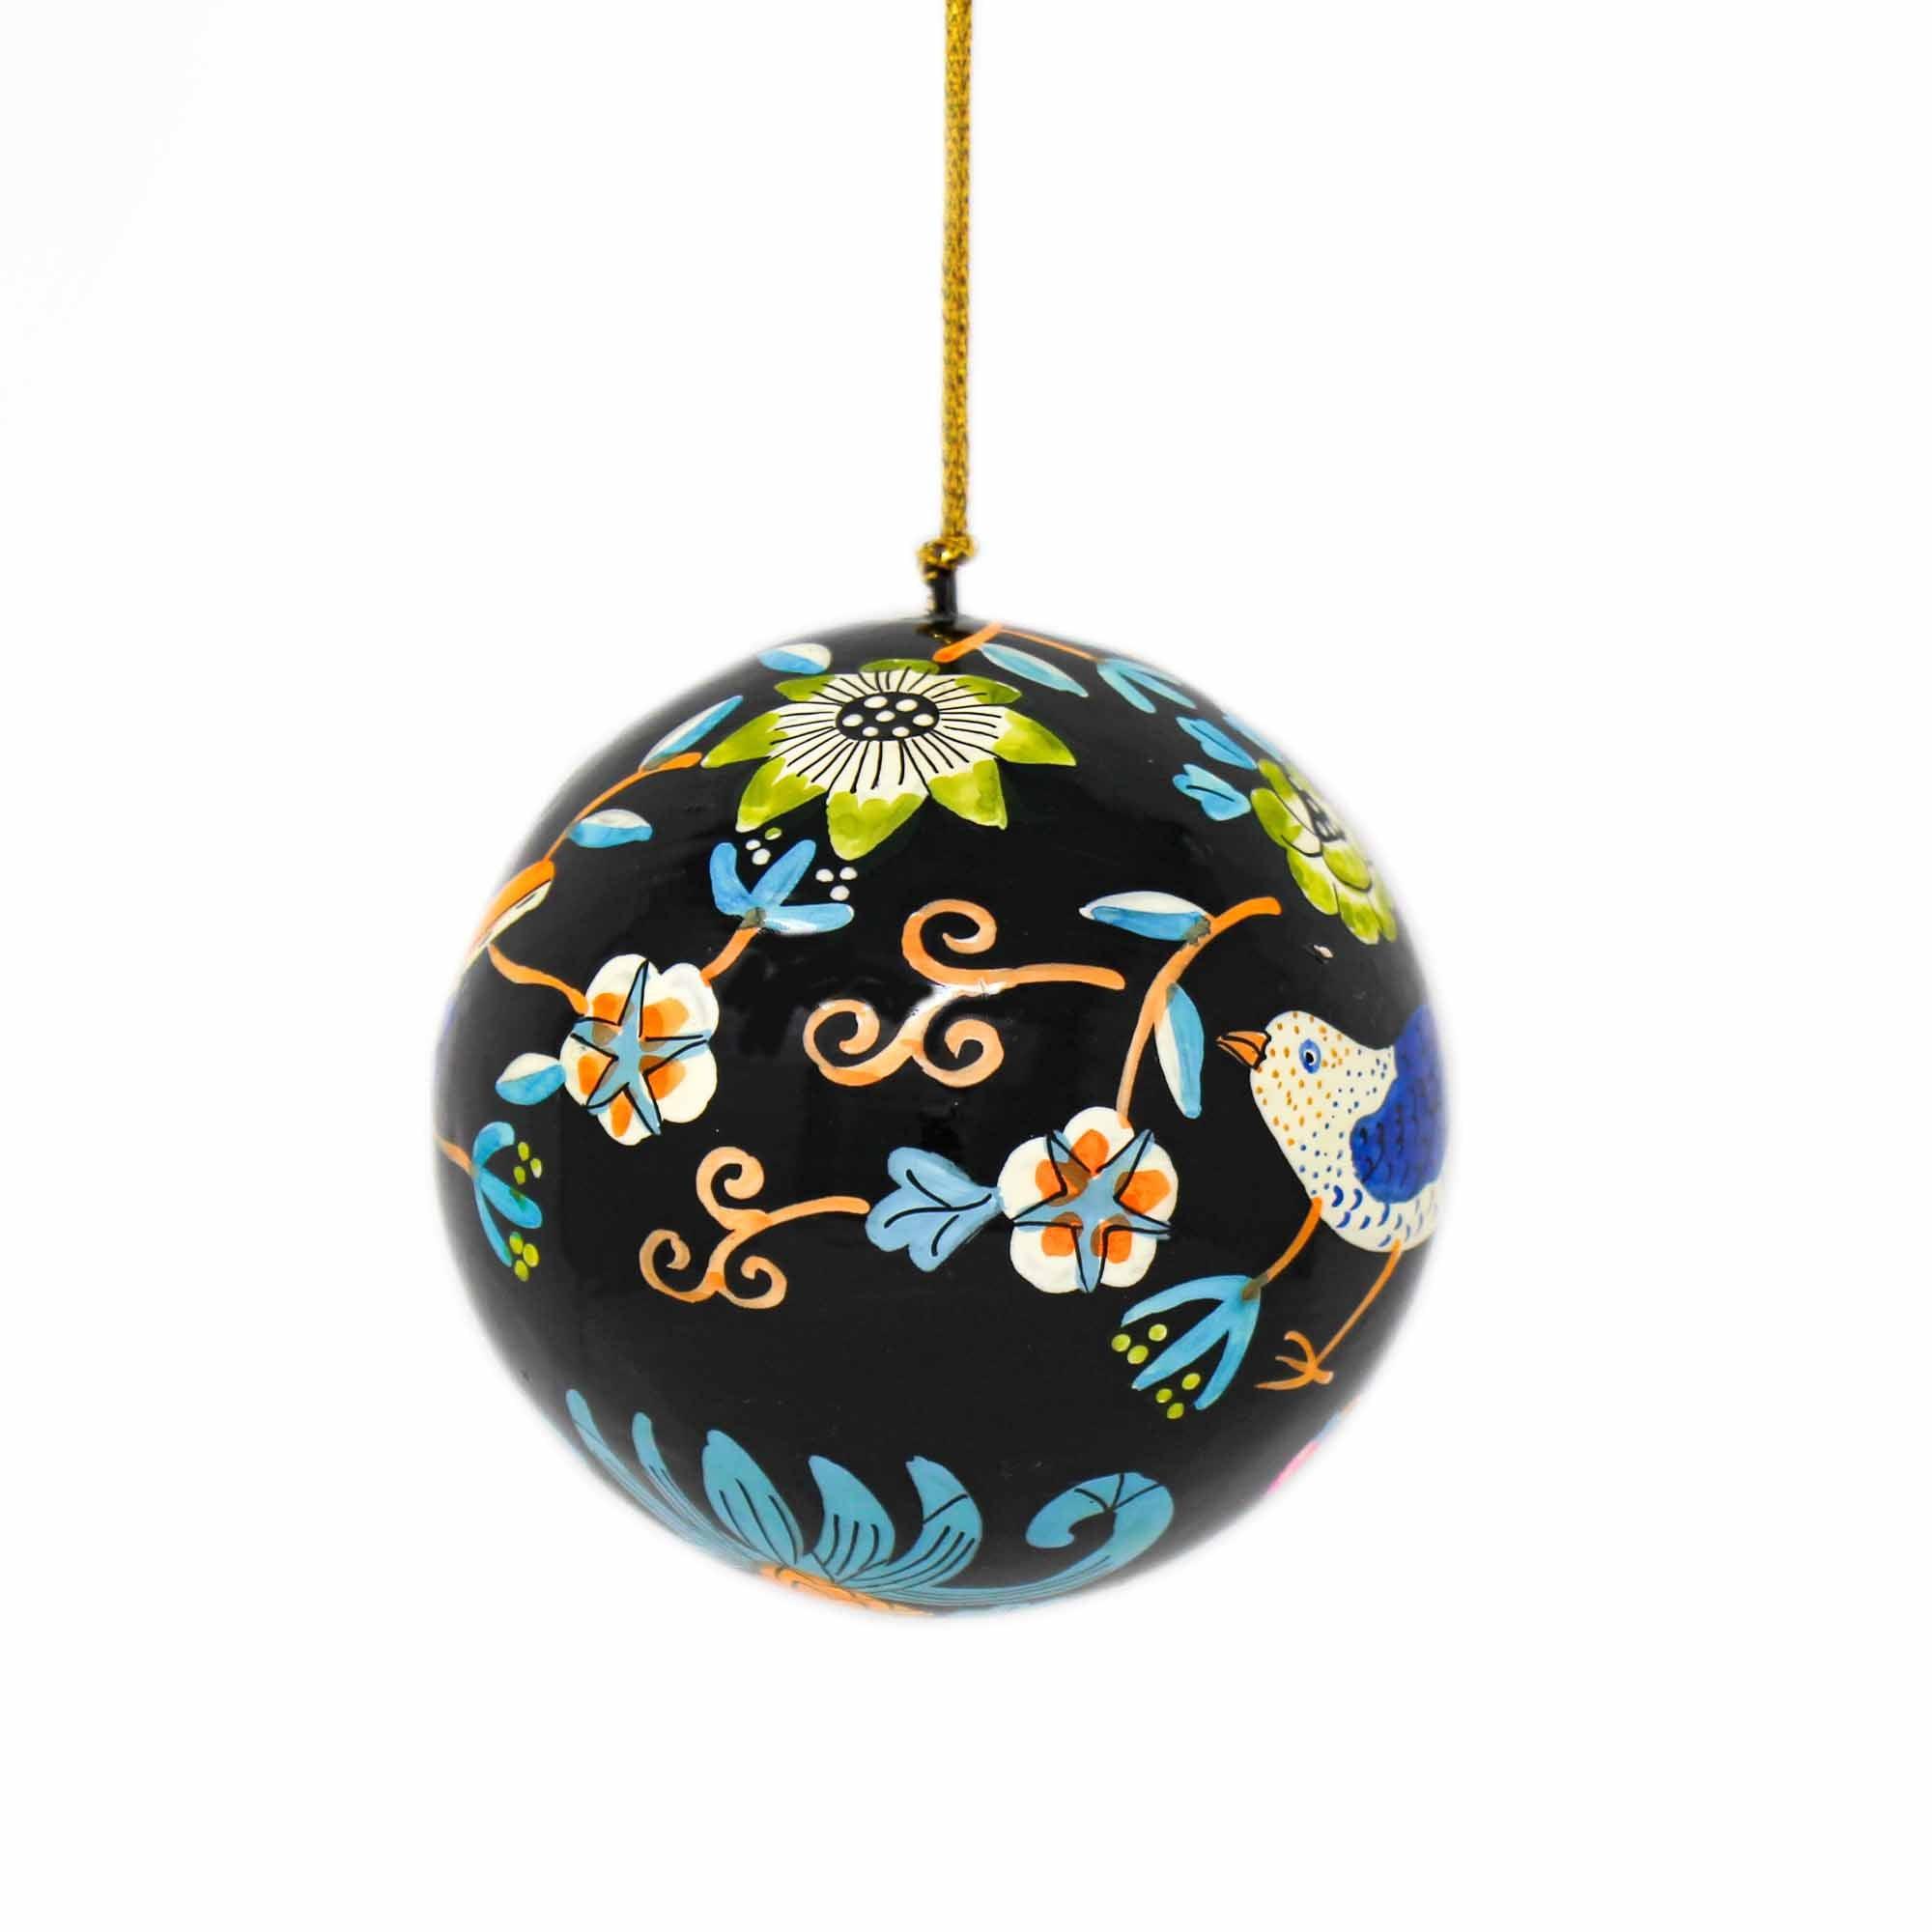 Handpainted Birds with Flowers Ornament, Set of 2 - Flyclothing LLC